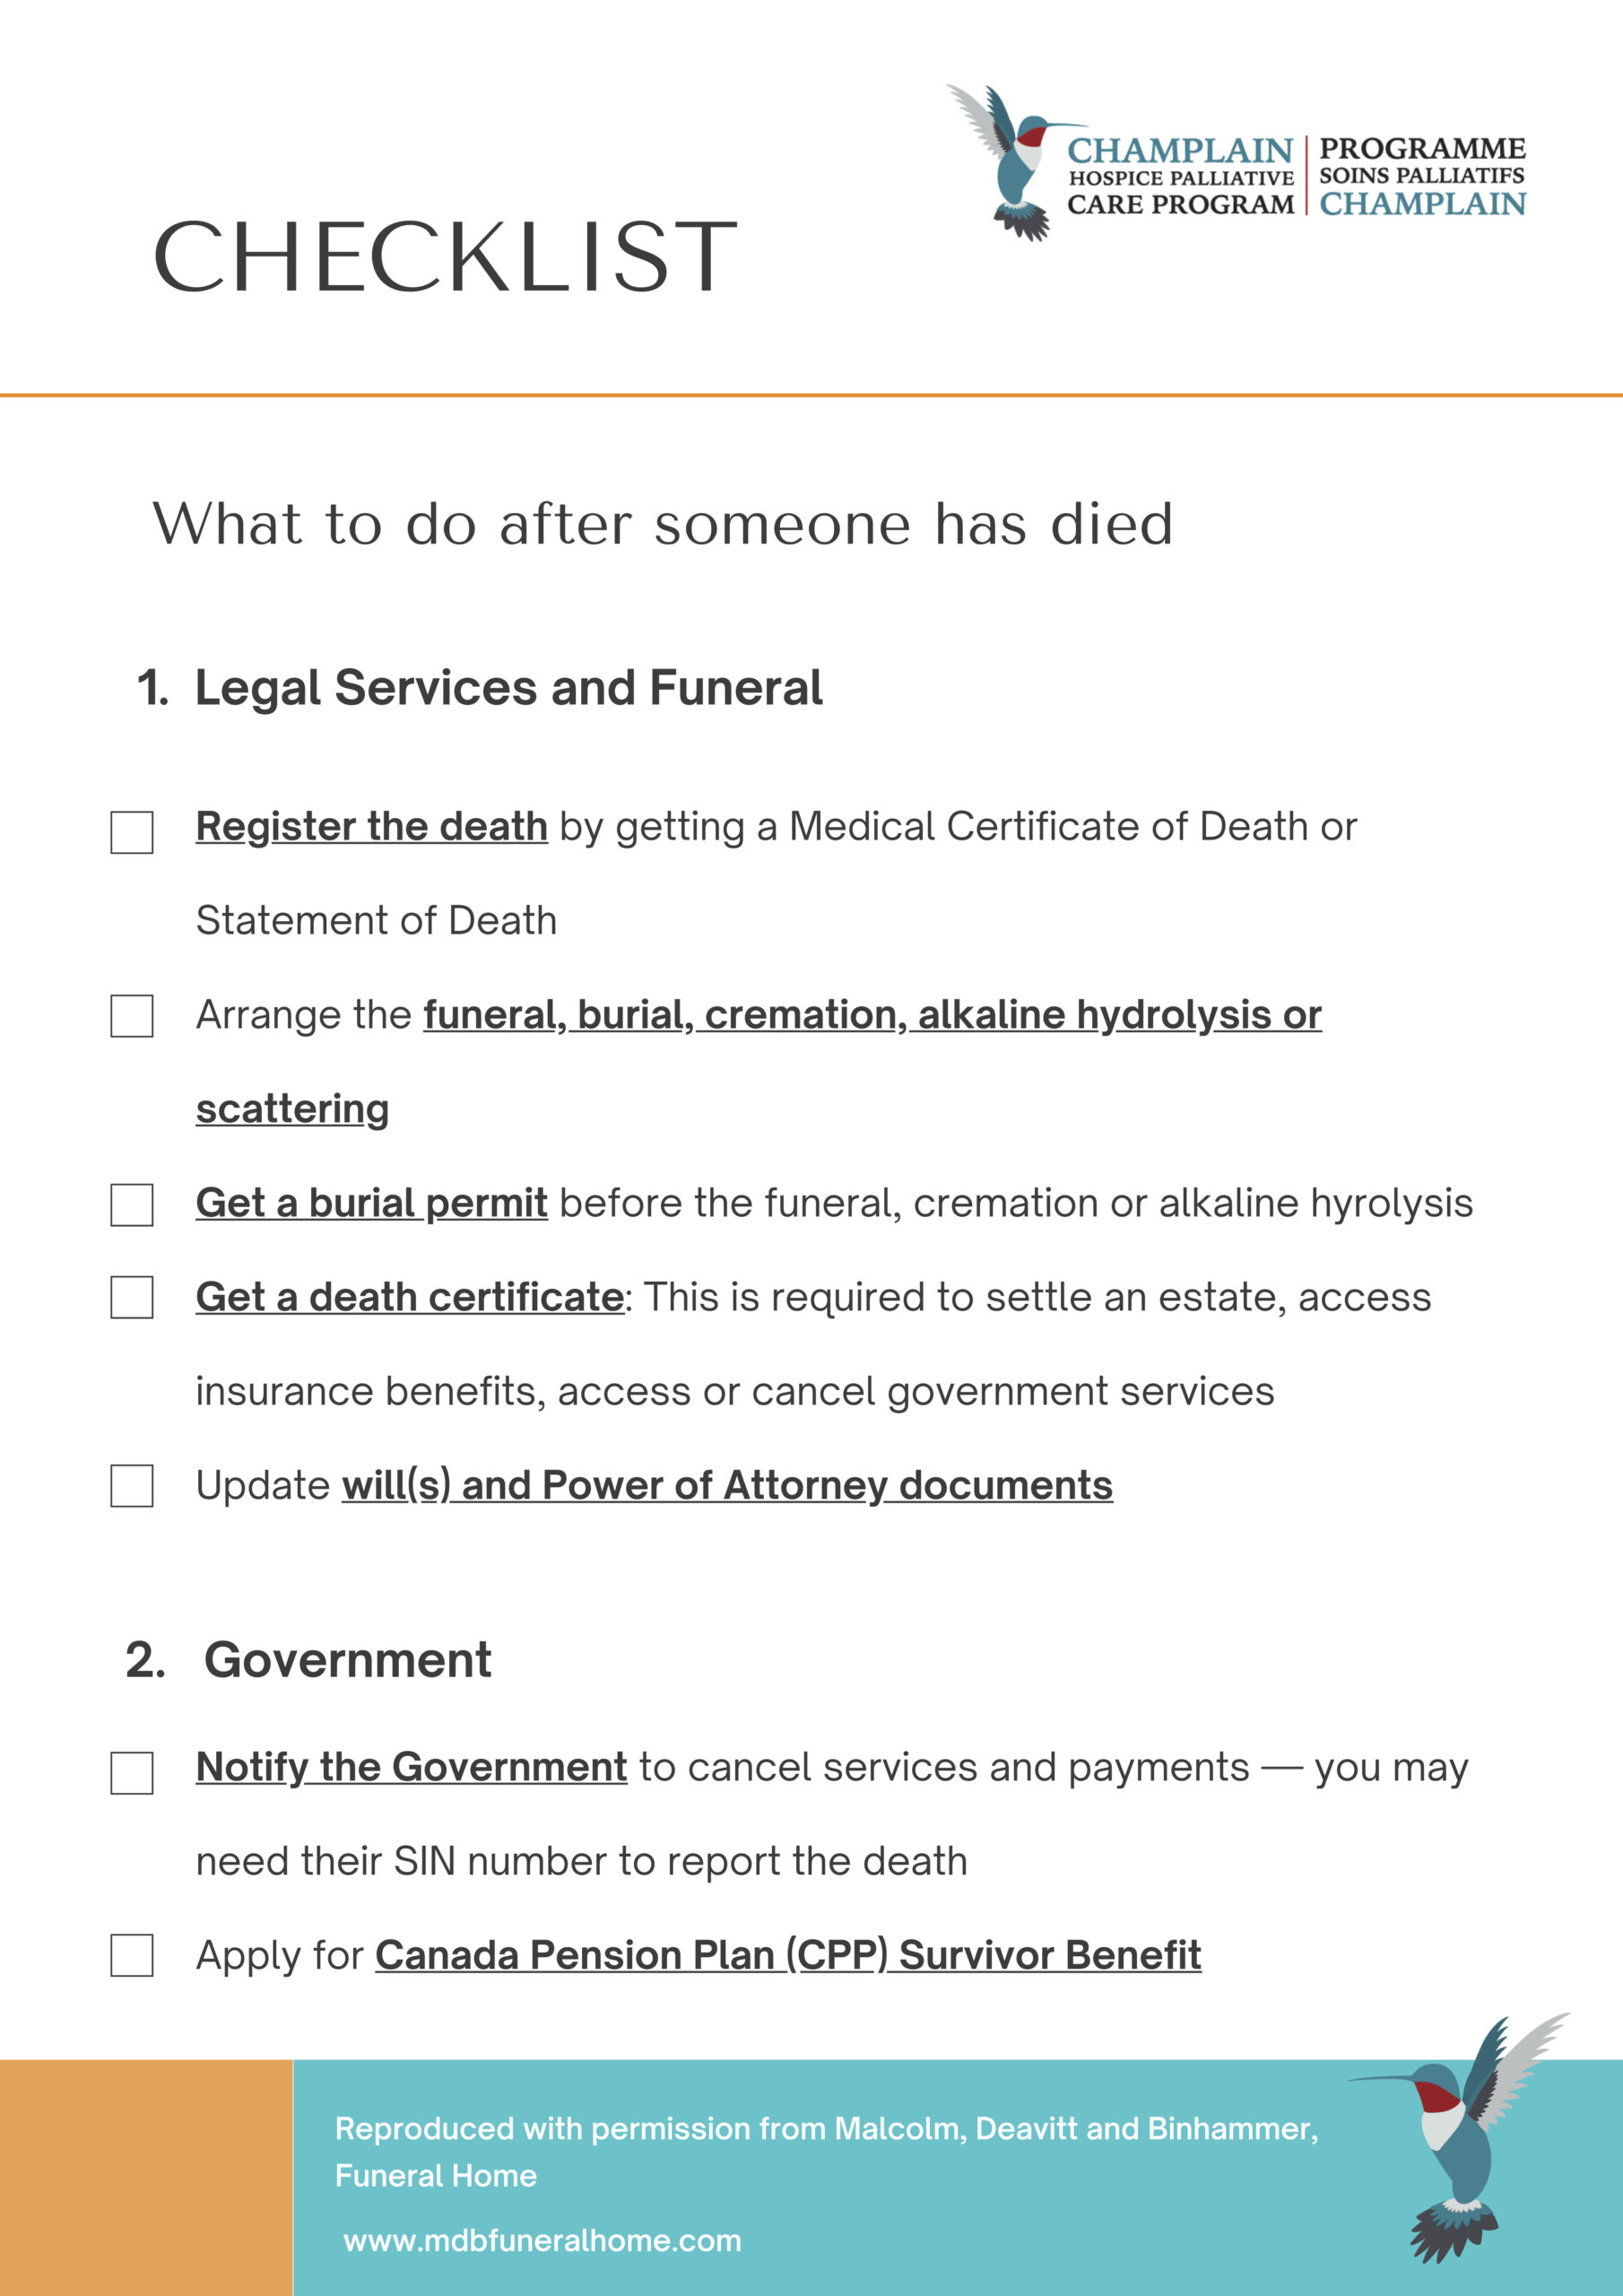 Checklist for what to do when someone dies